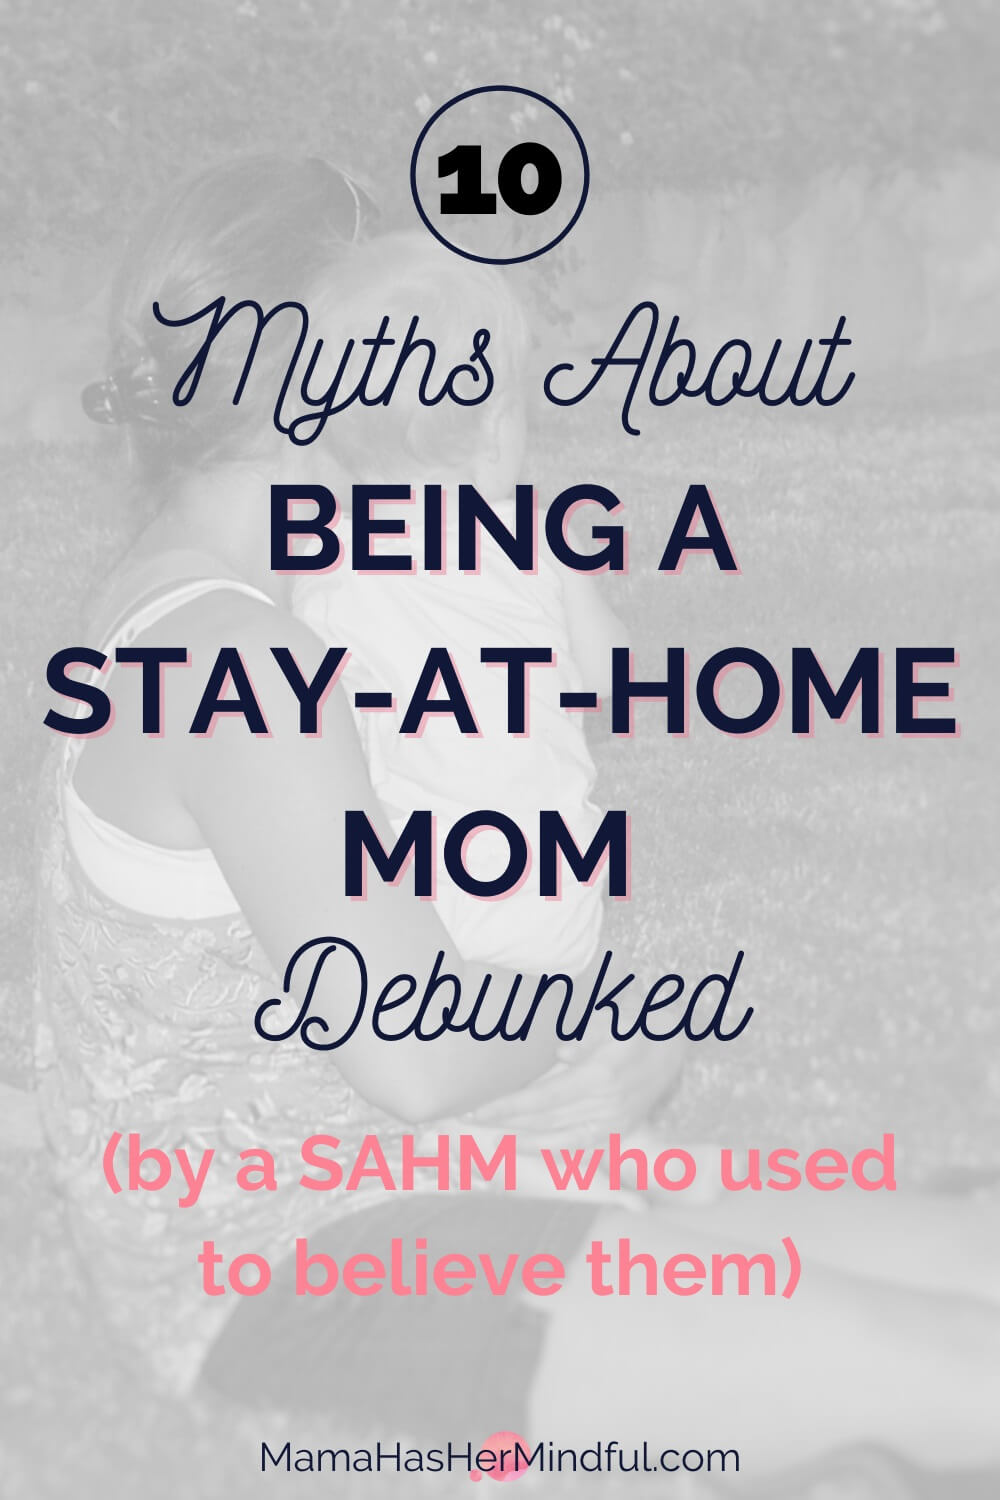 10 Myths About Being a Stay-at-Home Mom Debunked (by a SAHM Who Used to Believe Them)